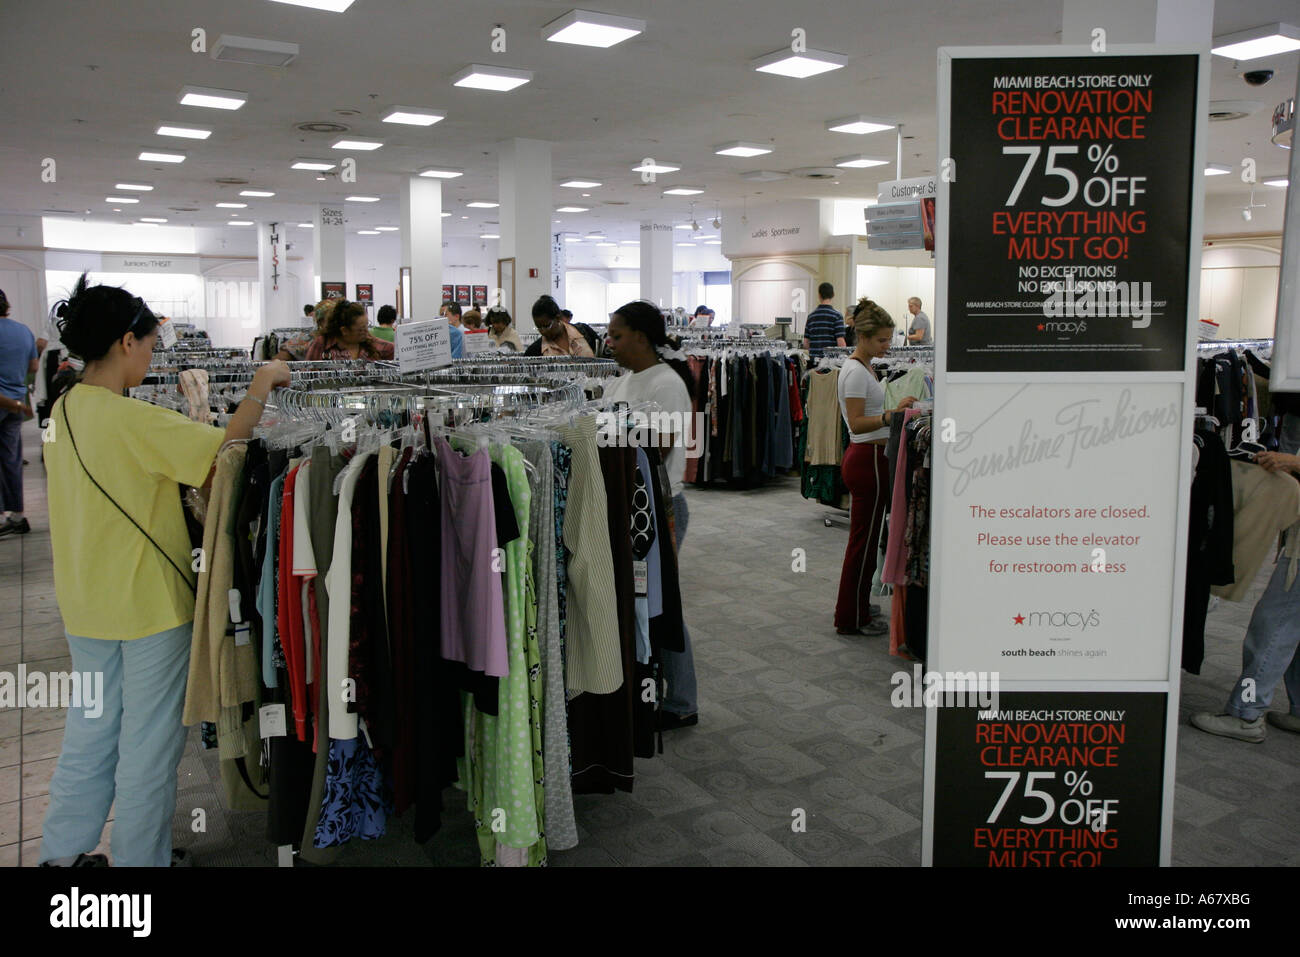 Miami Beach Florida Macy&#39;s Department Store Renovation Clearance Sale Stock Photo, Royalty Free ...